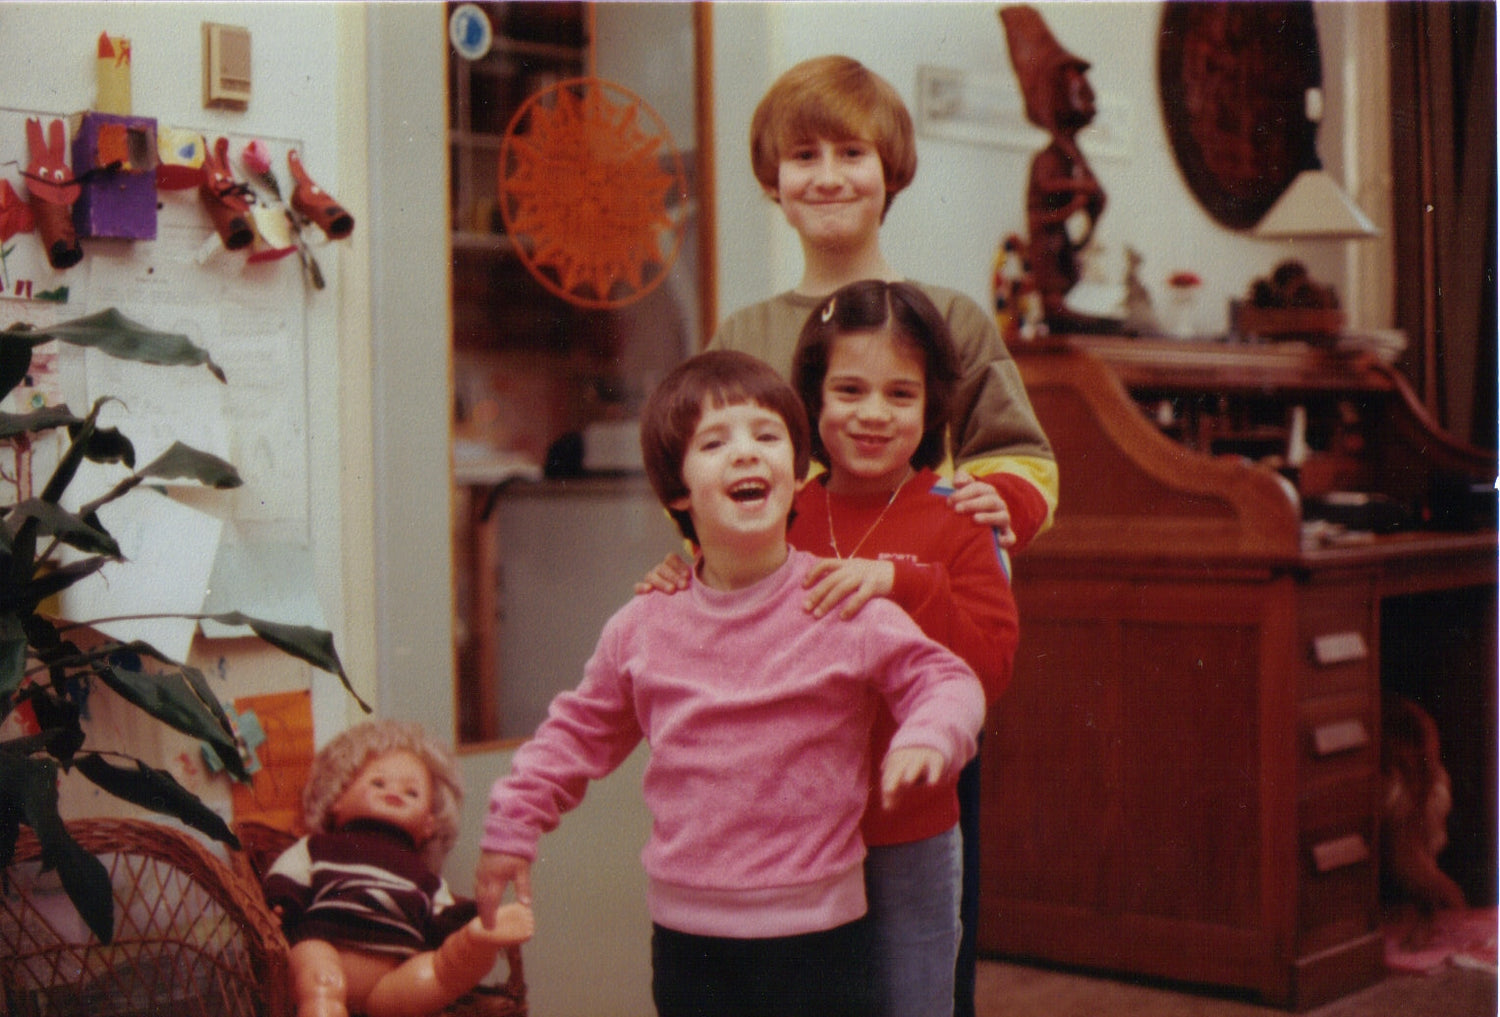 An old photo of Danae kurvers and her brother and sister